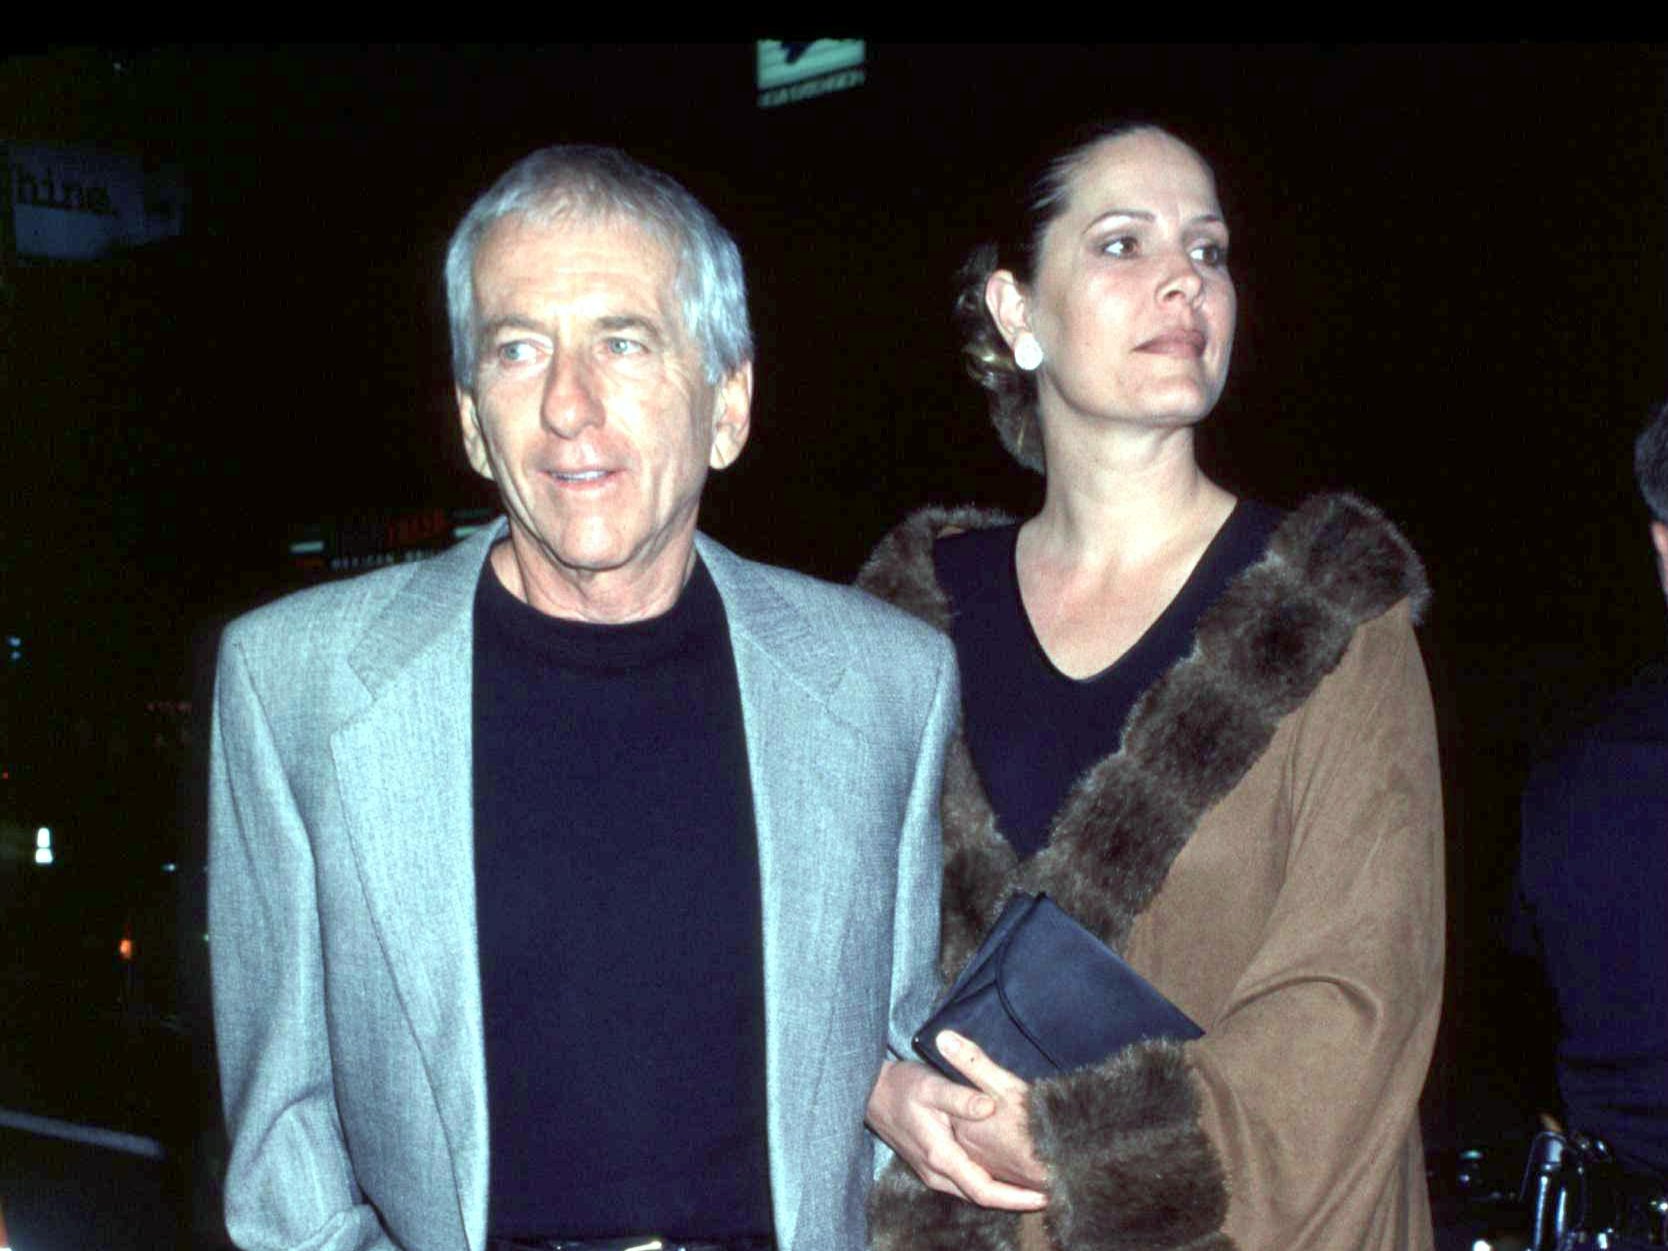 Barry Newman and his wife, Angela, in 1999